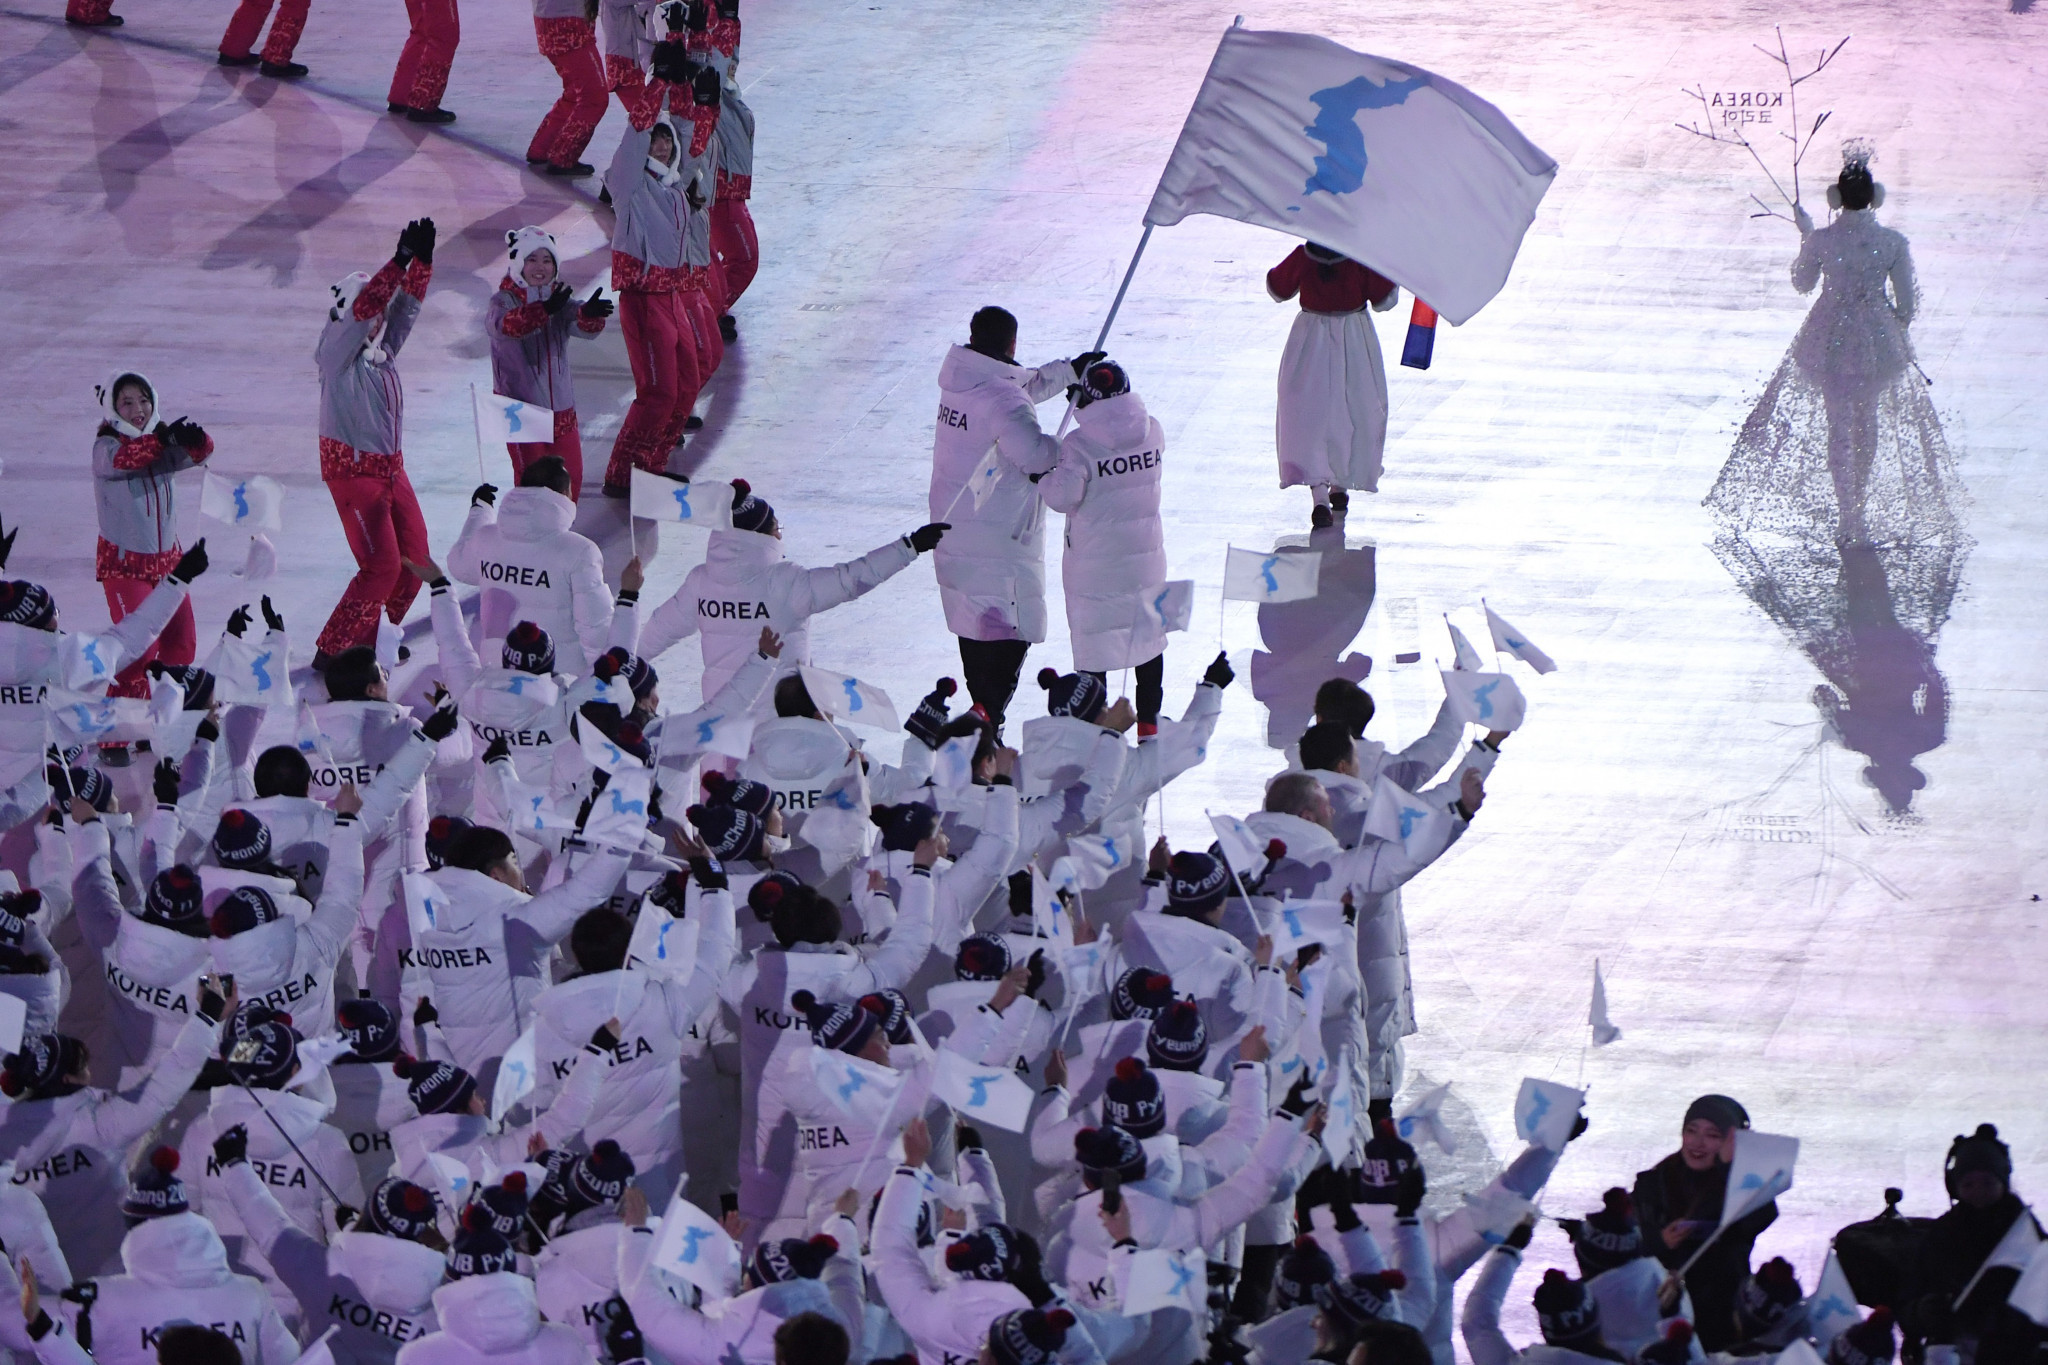 Talks underway over possible unified Korean team at 2018 Asian Games